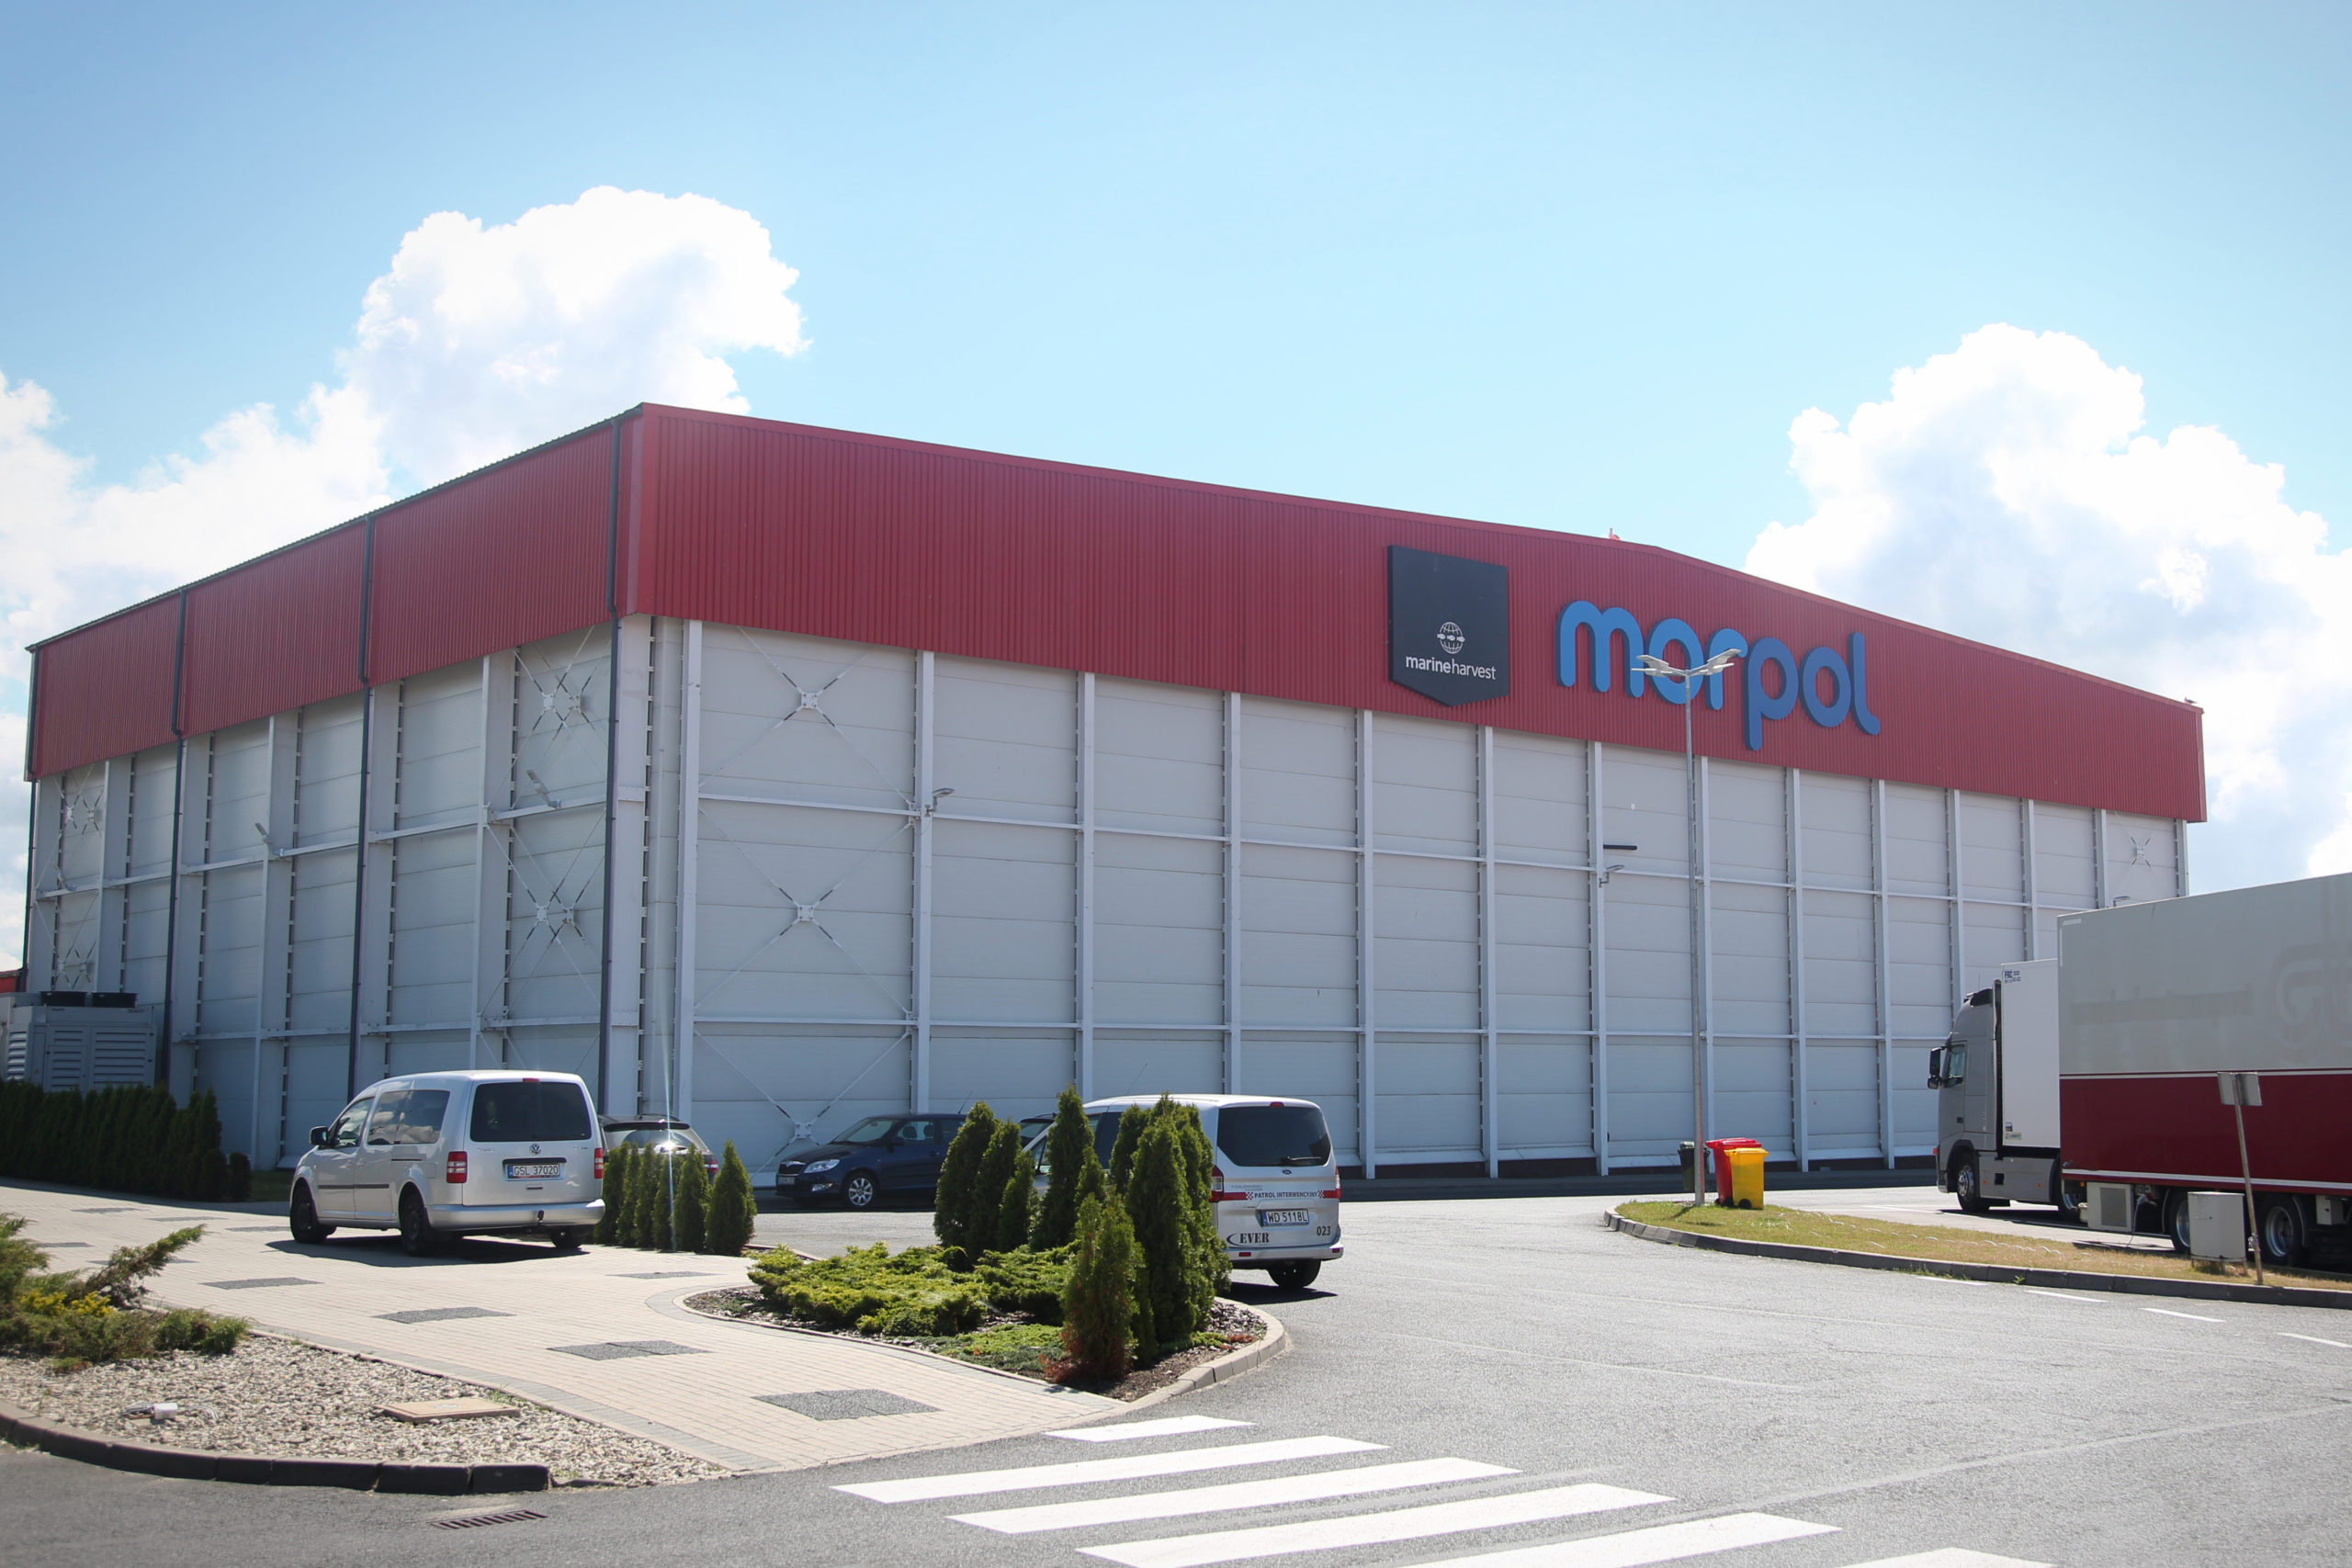 The Morpol site in Poland (before Mowi rebranding)